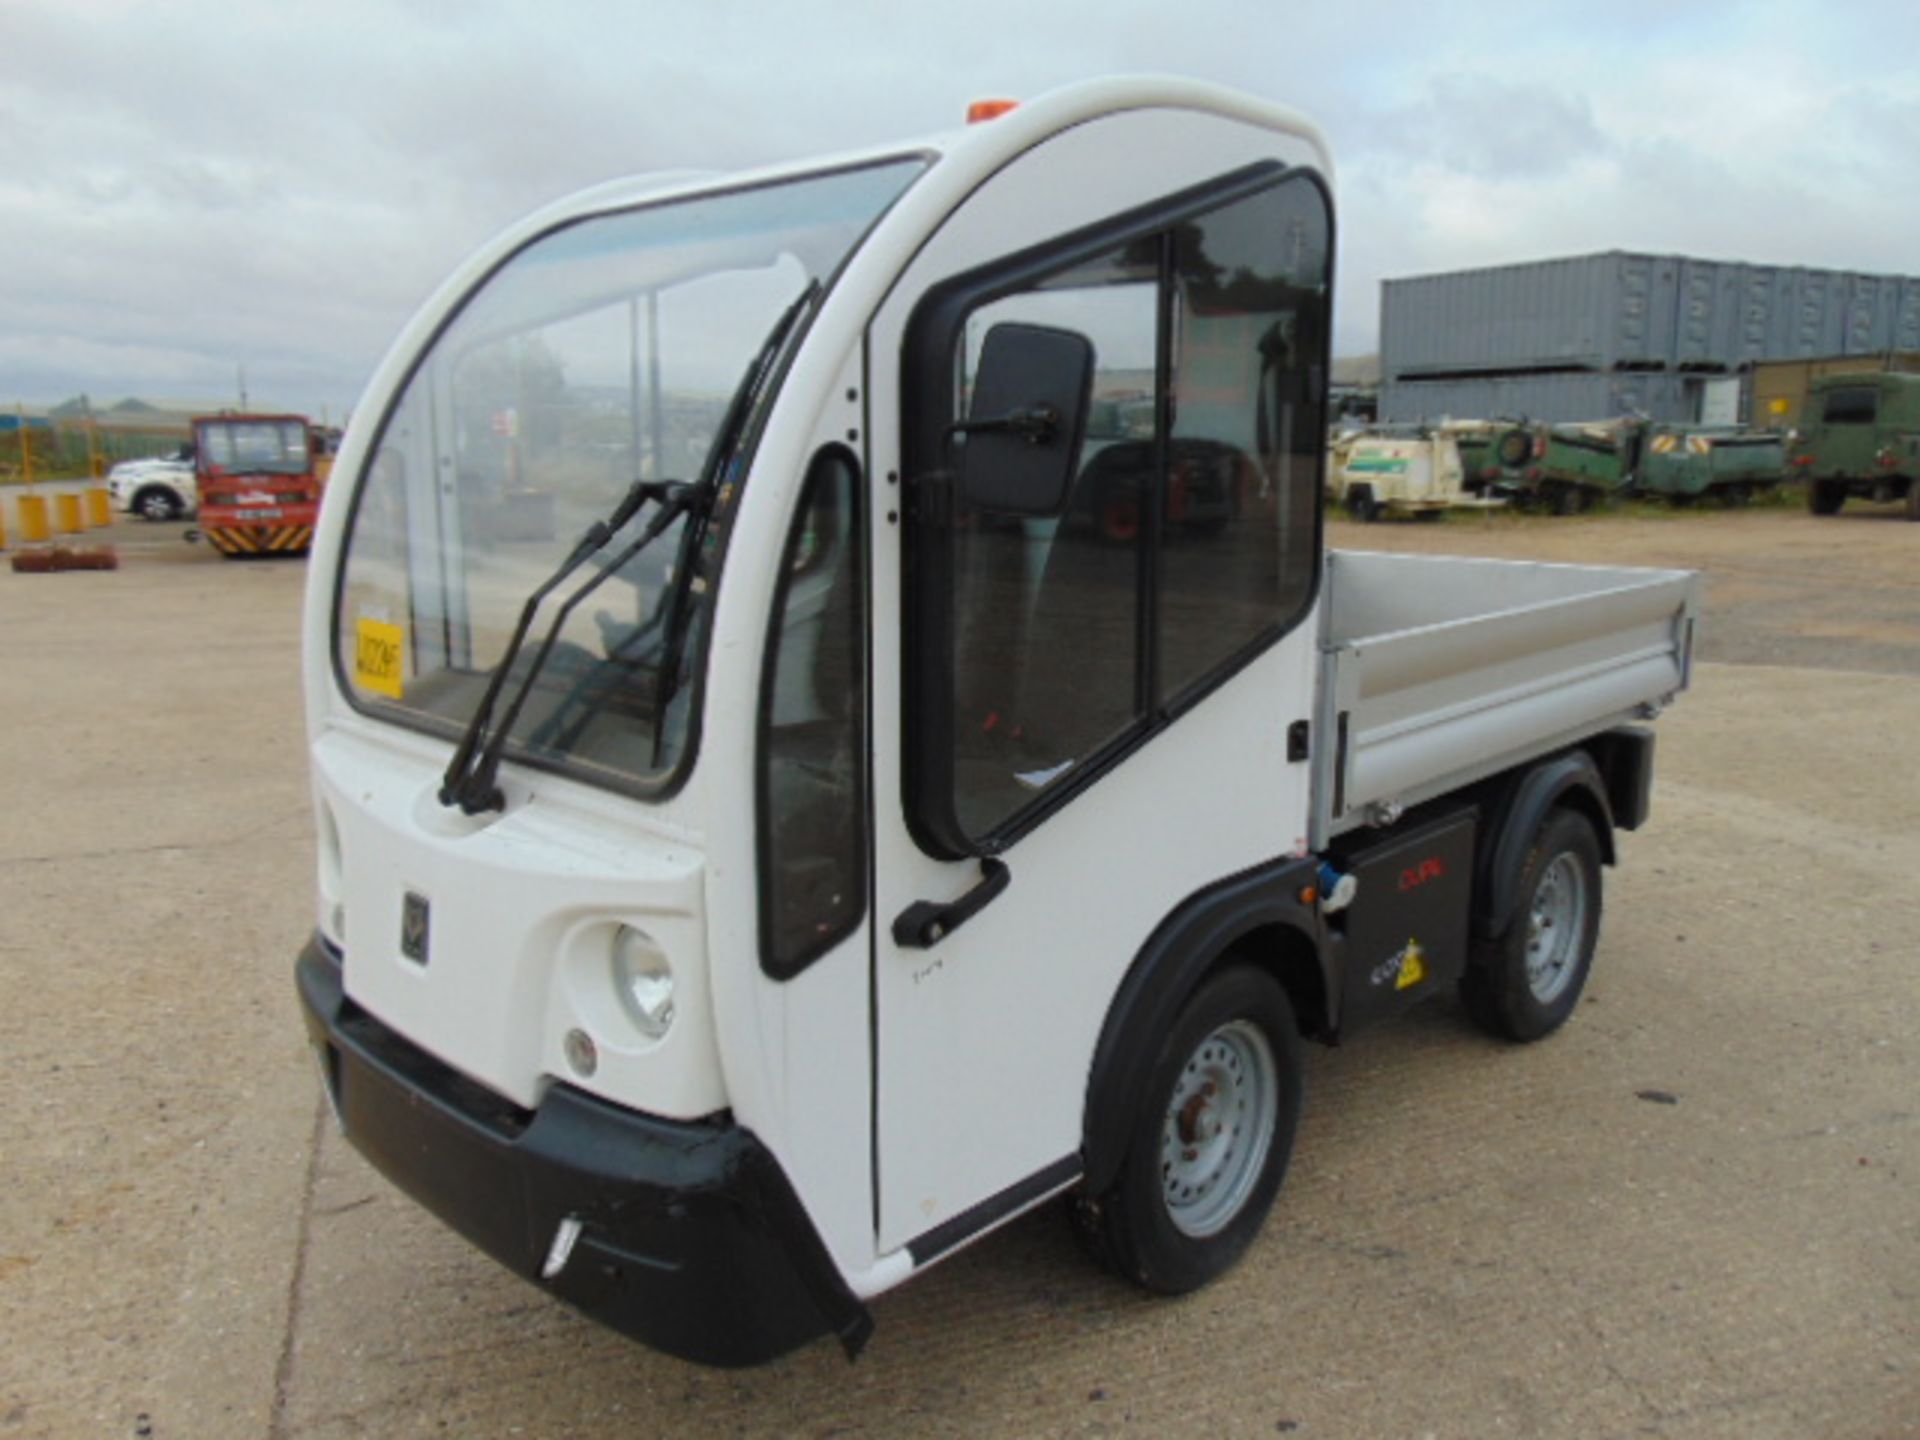 Goupil 2WD Electric Dropside Utility Vehicle - Image 3 of 14